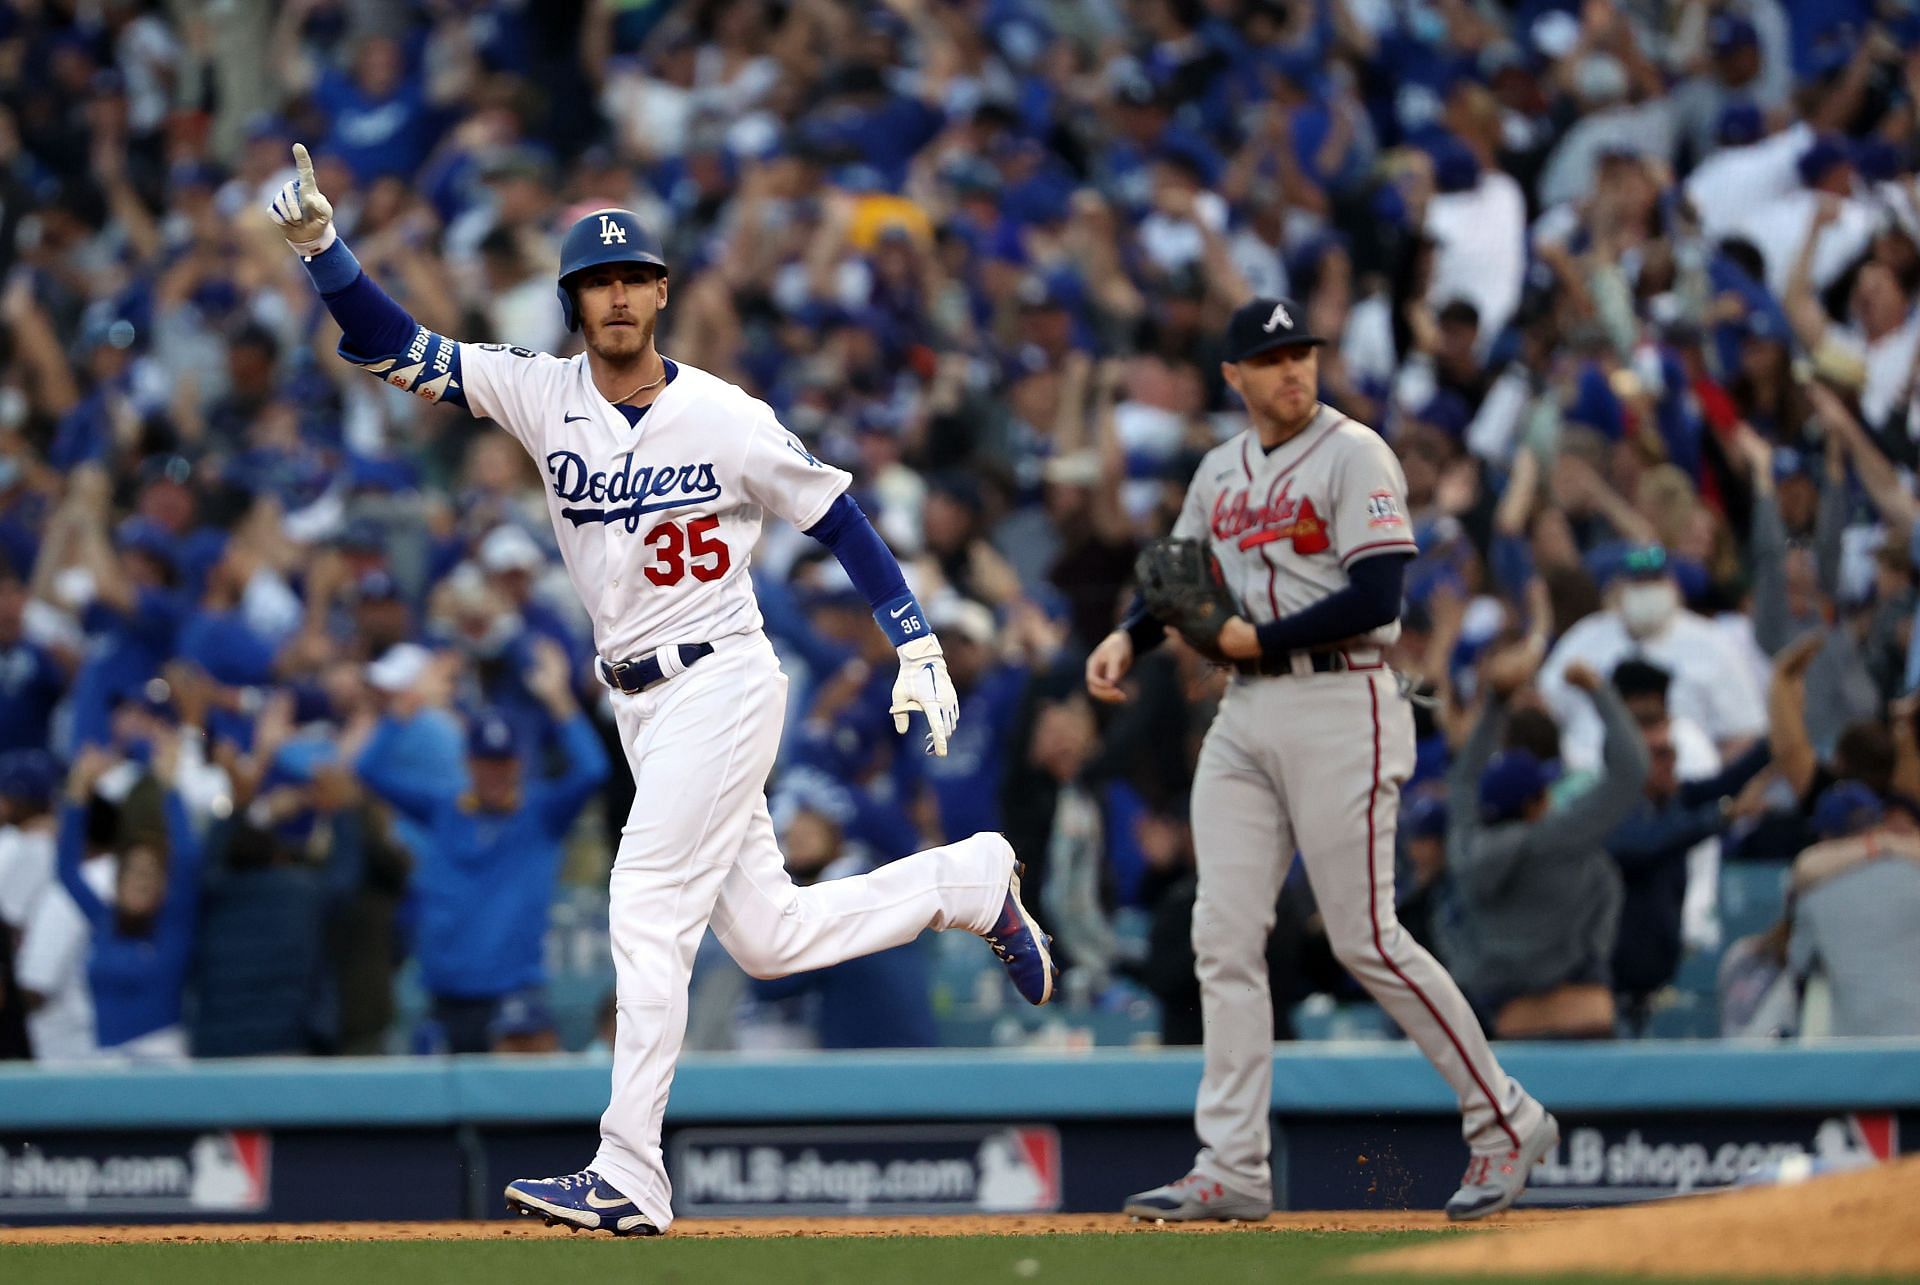 Los Angeles Dodgers will play at home next on April 29